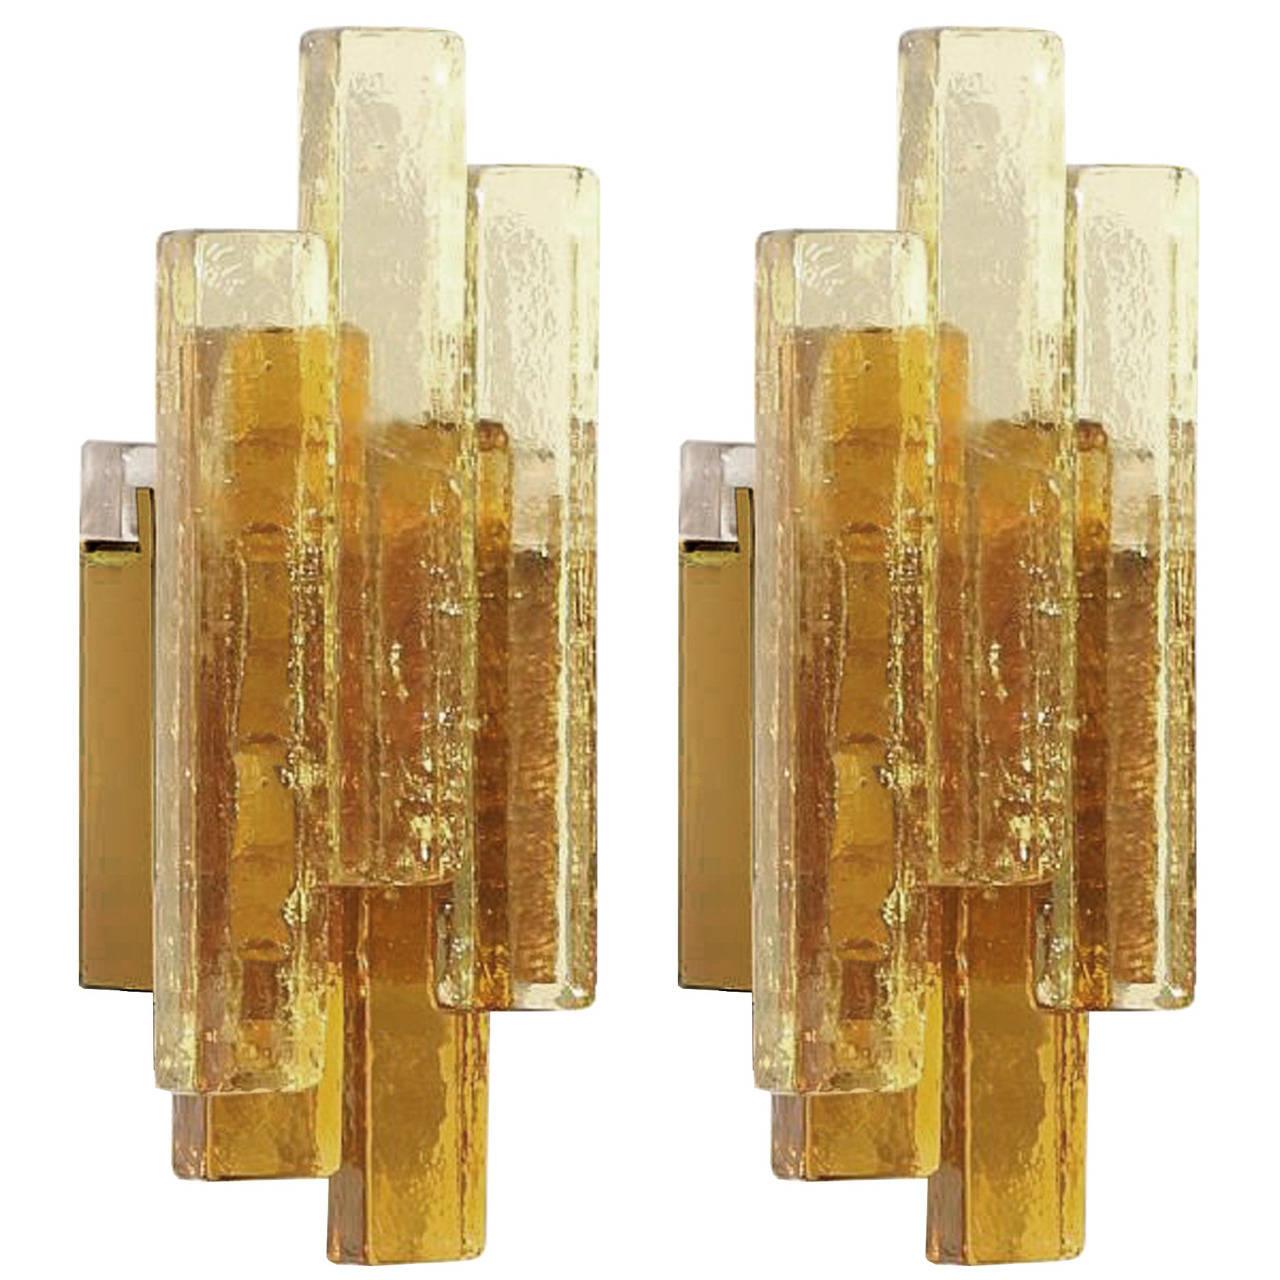 A pair of golden and amber colored glass sconces with brass wall mountings and hardware by Svend Aage Holm Sorensen for Hassel Teudt.

Danish, Circa 1960's

Two (2) Pairs Are Available